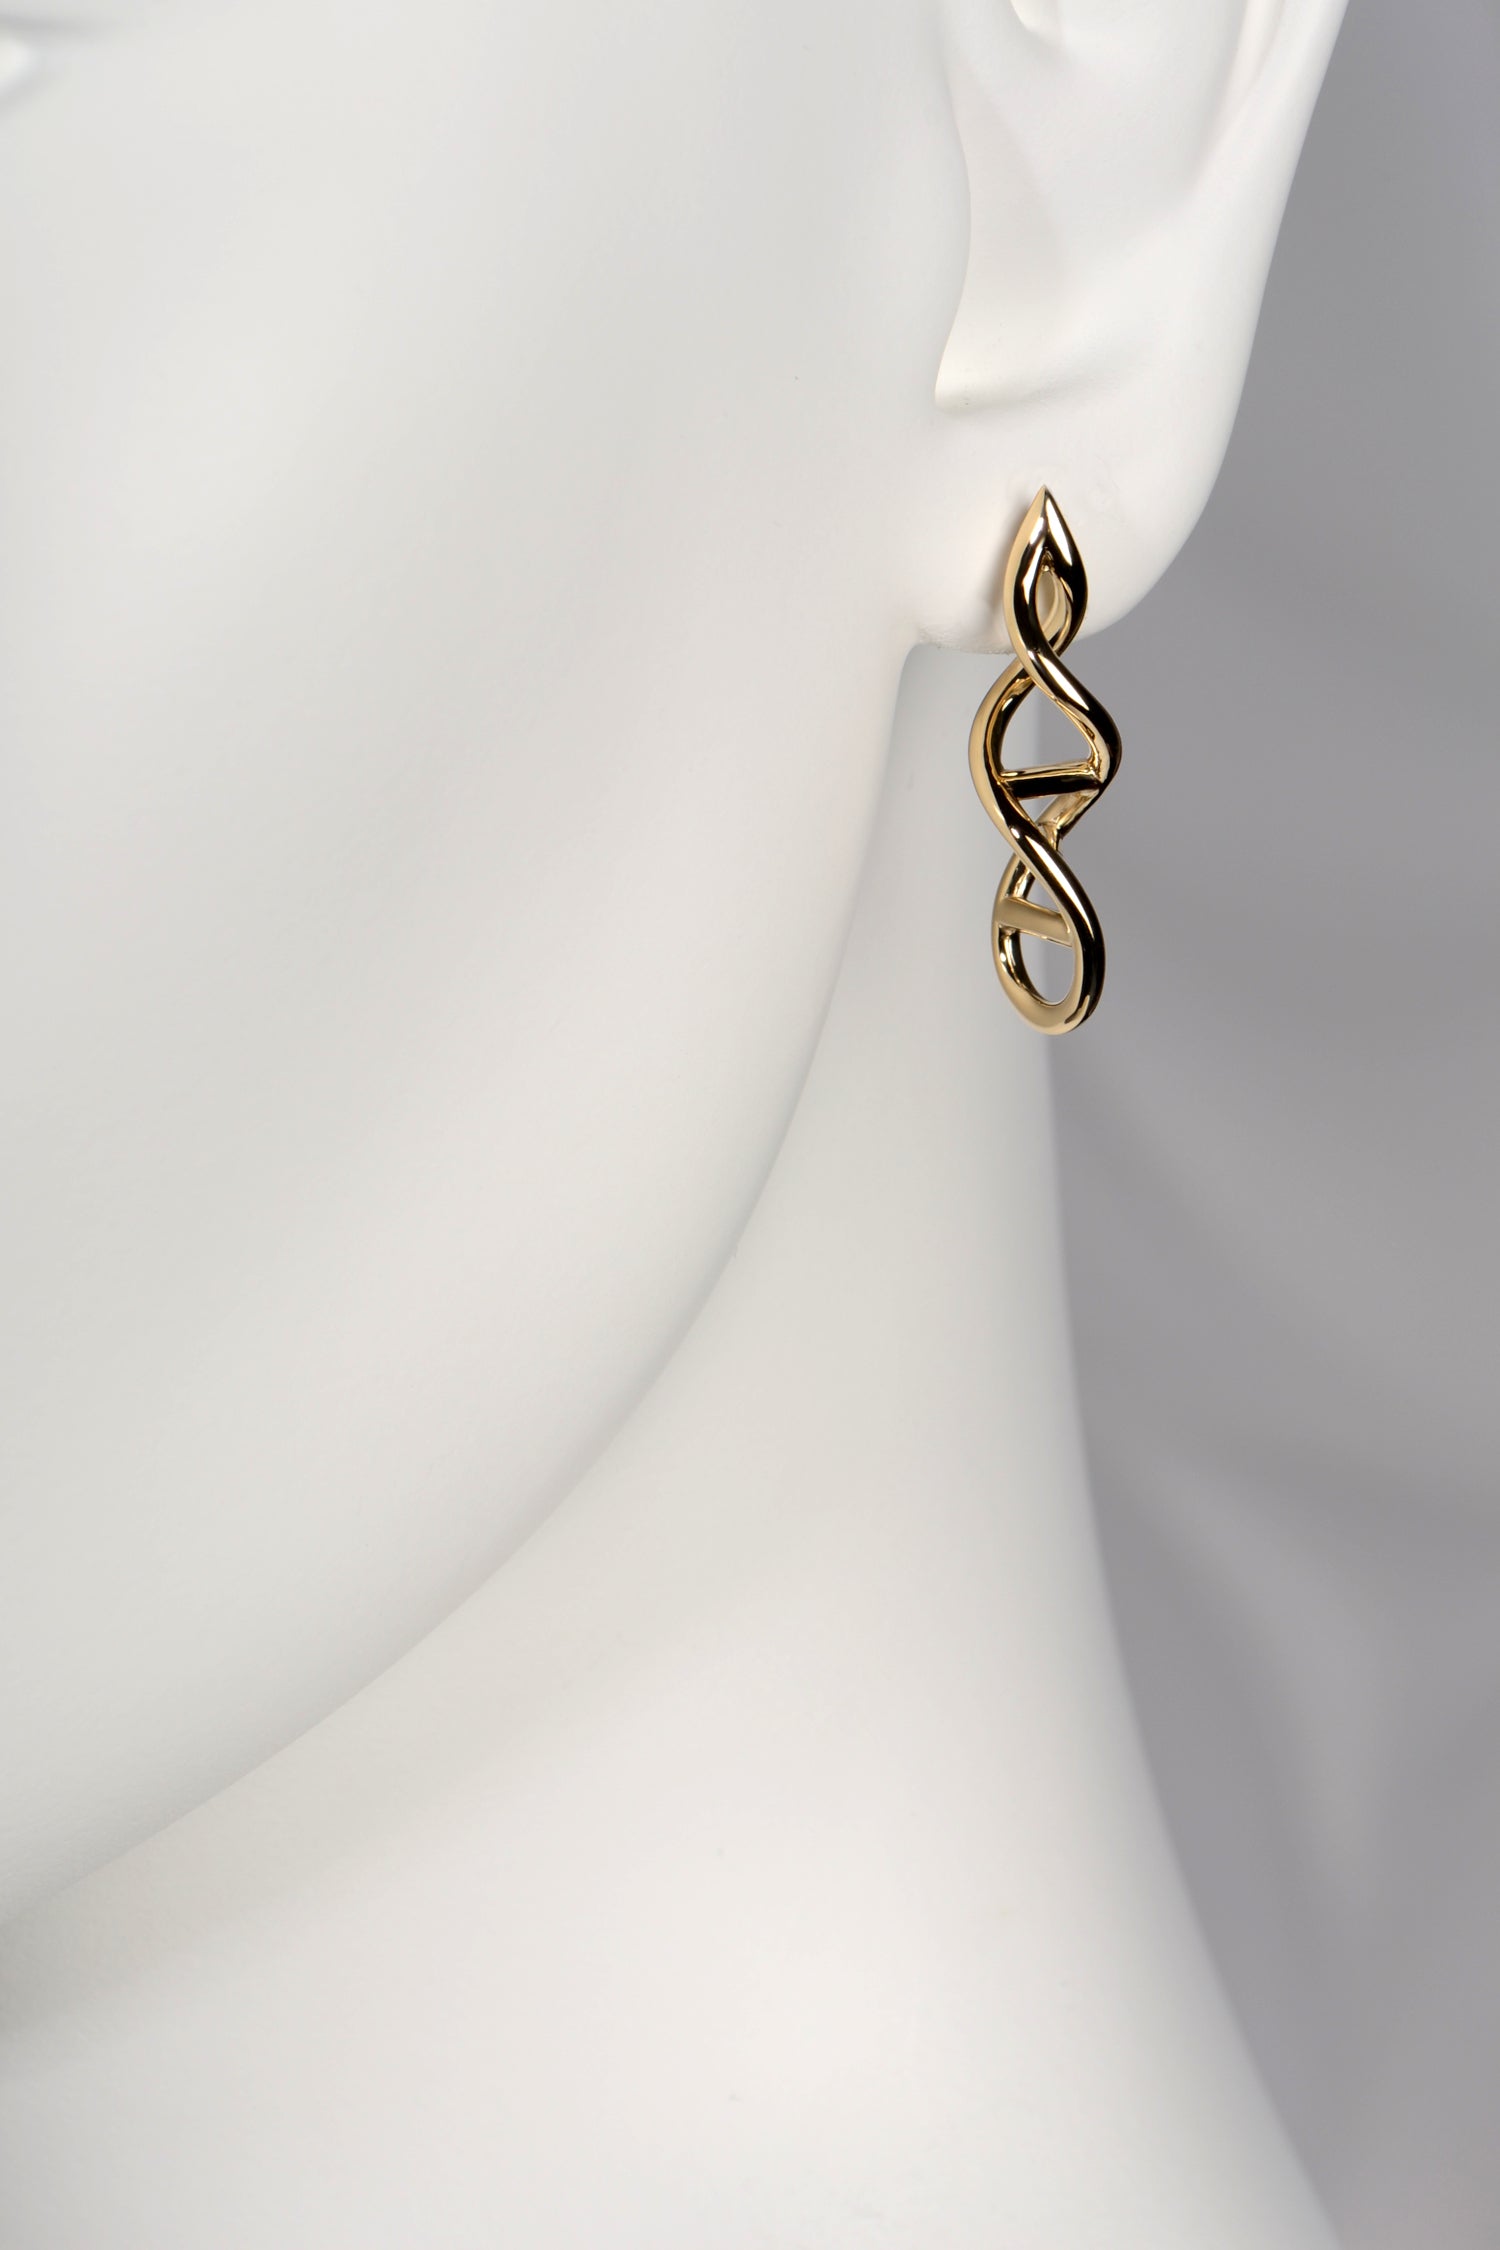 yellow gold DNA large drop earrings on model ear to show size